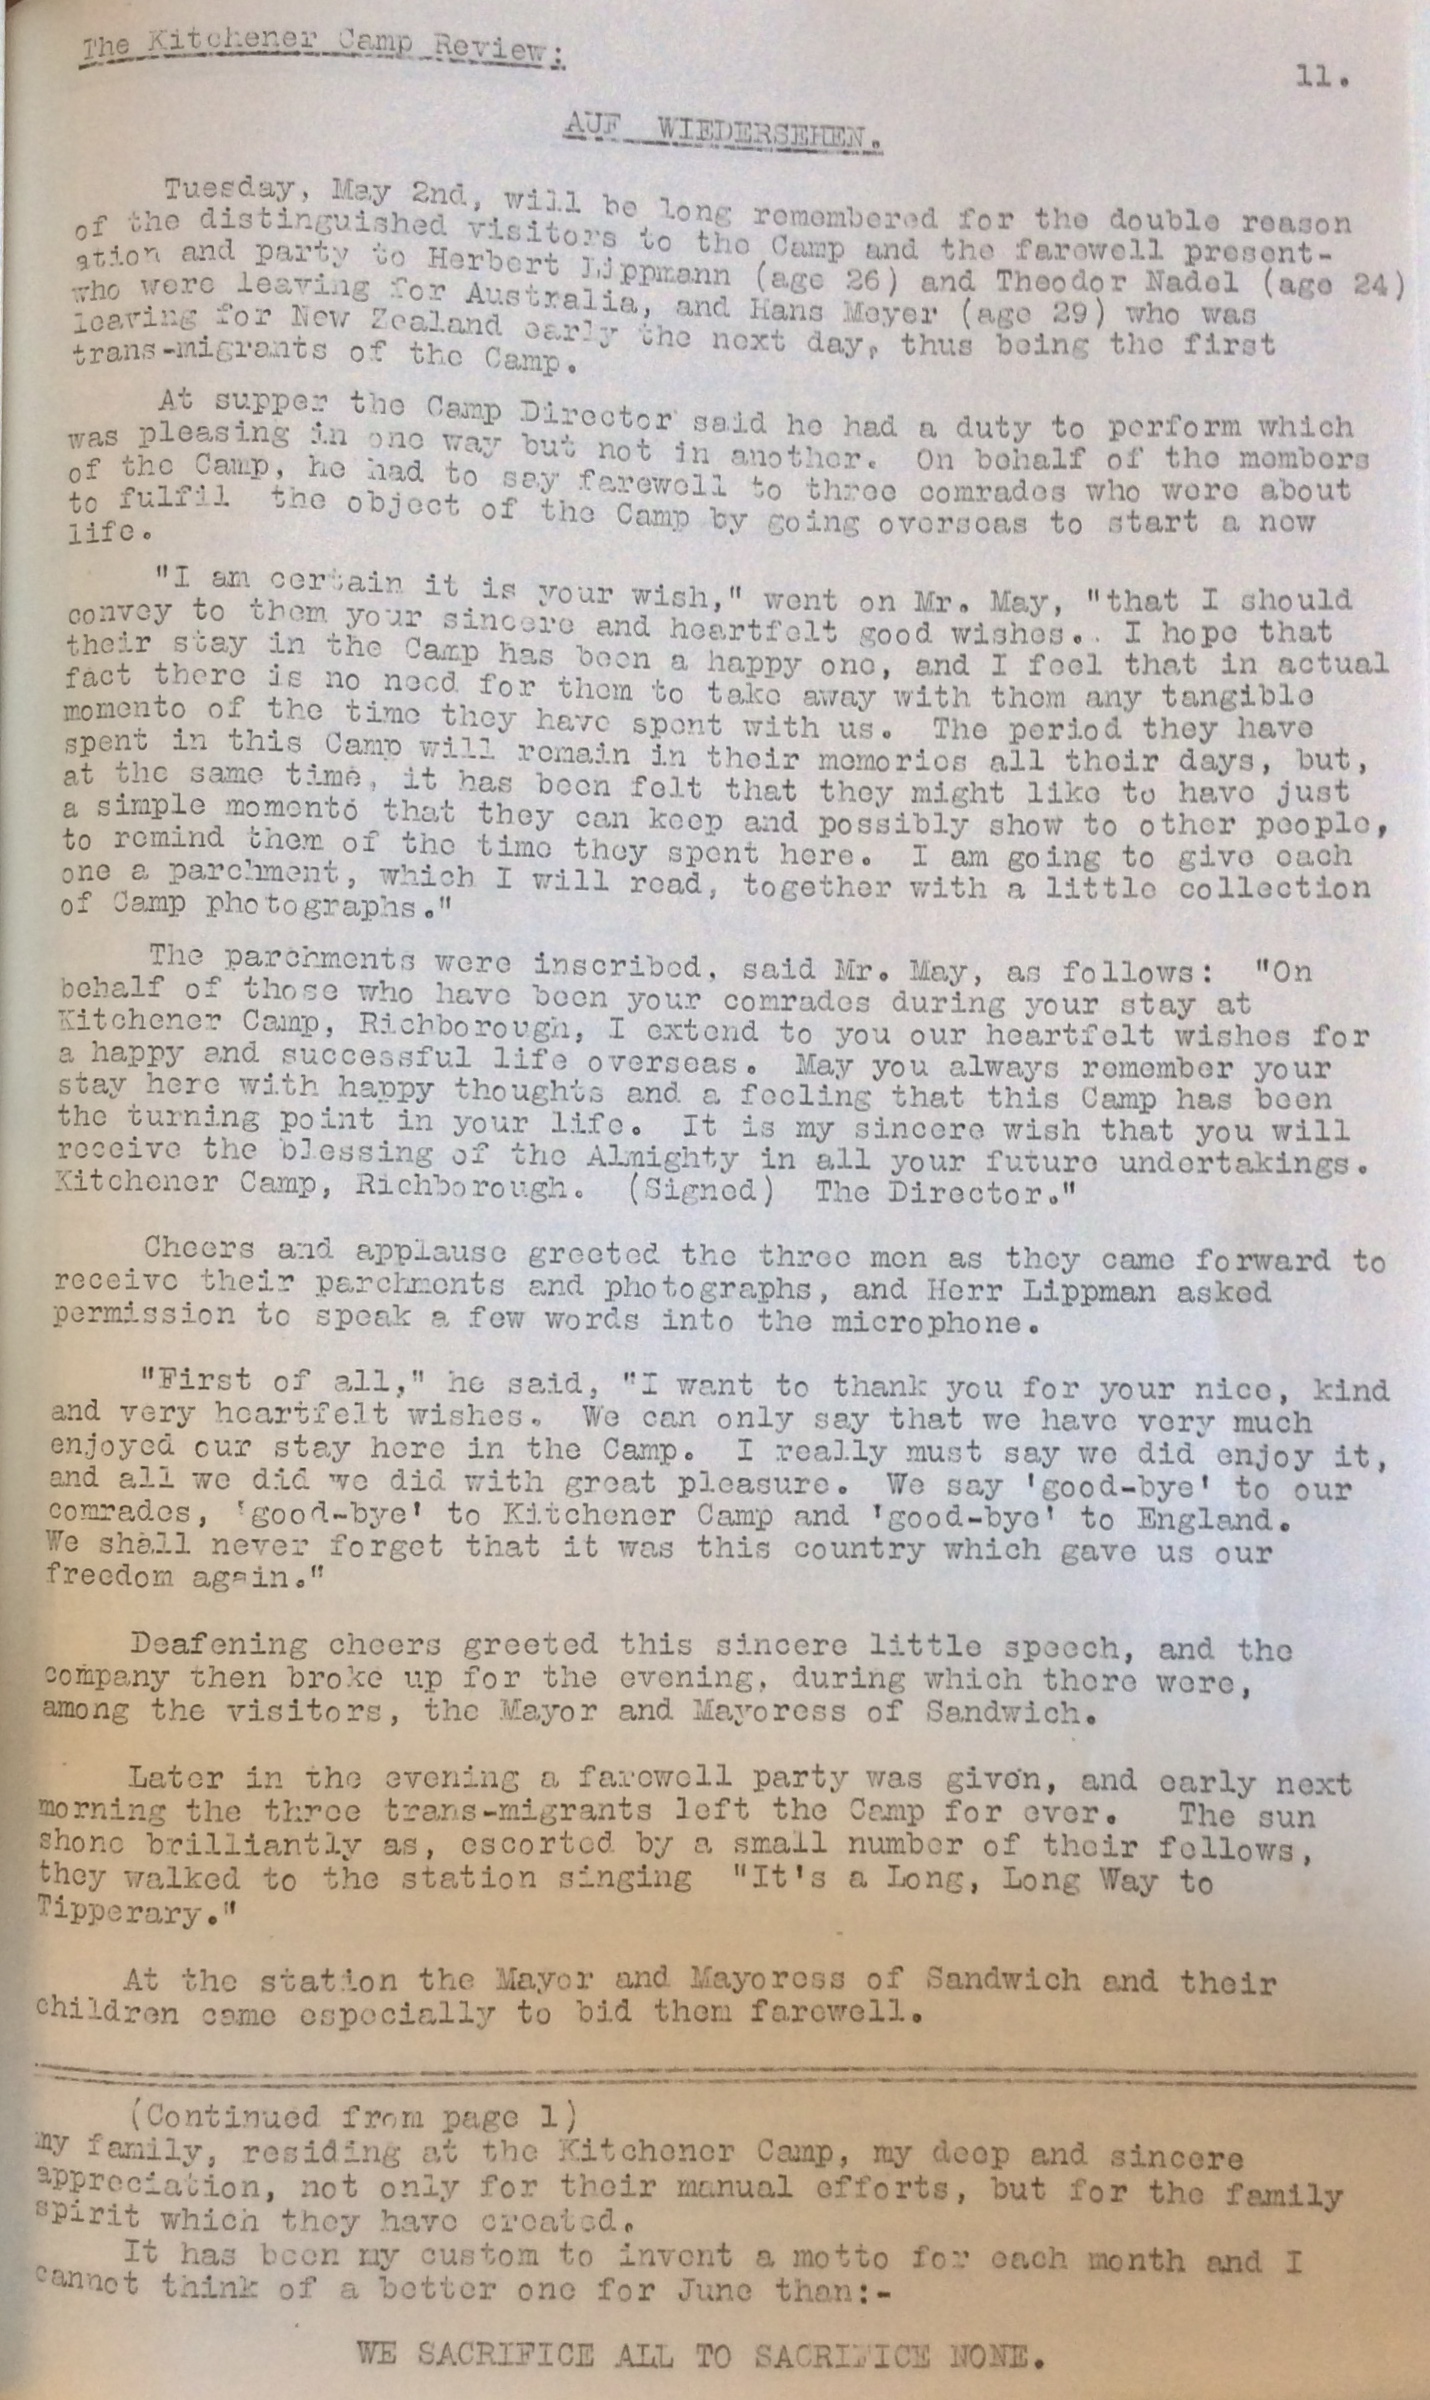 Kitchener Camp Review, June 1939, page 11